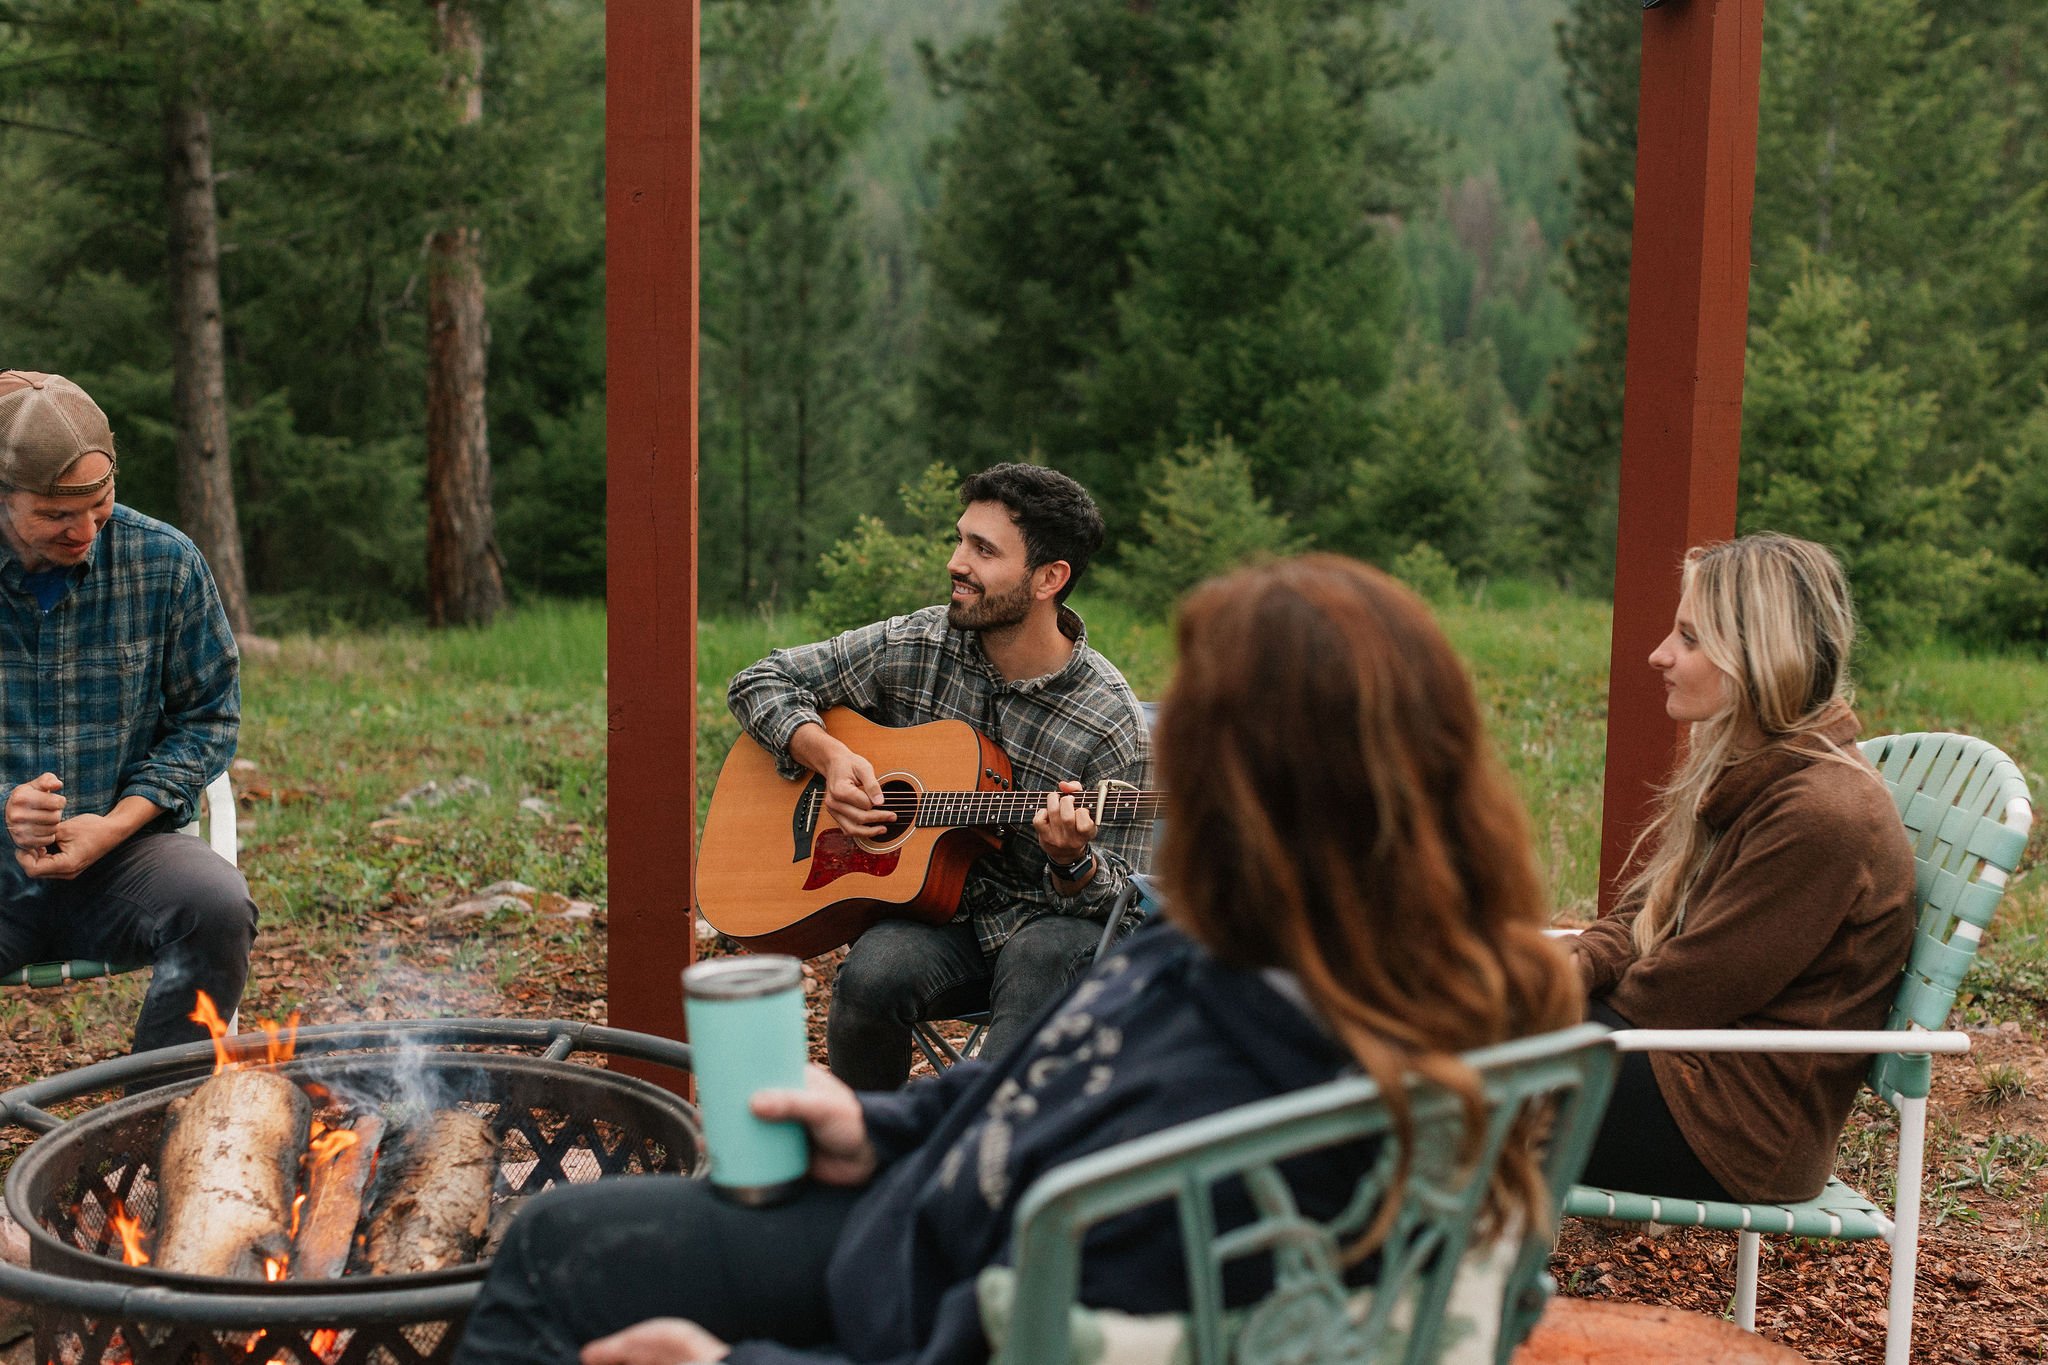 Campfire evenings at The Hohnstead Glamping Cabins Resort near Missoula, Montana